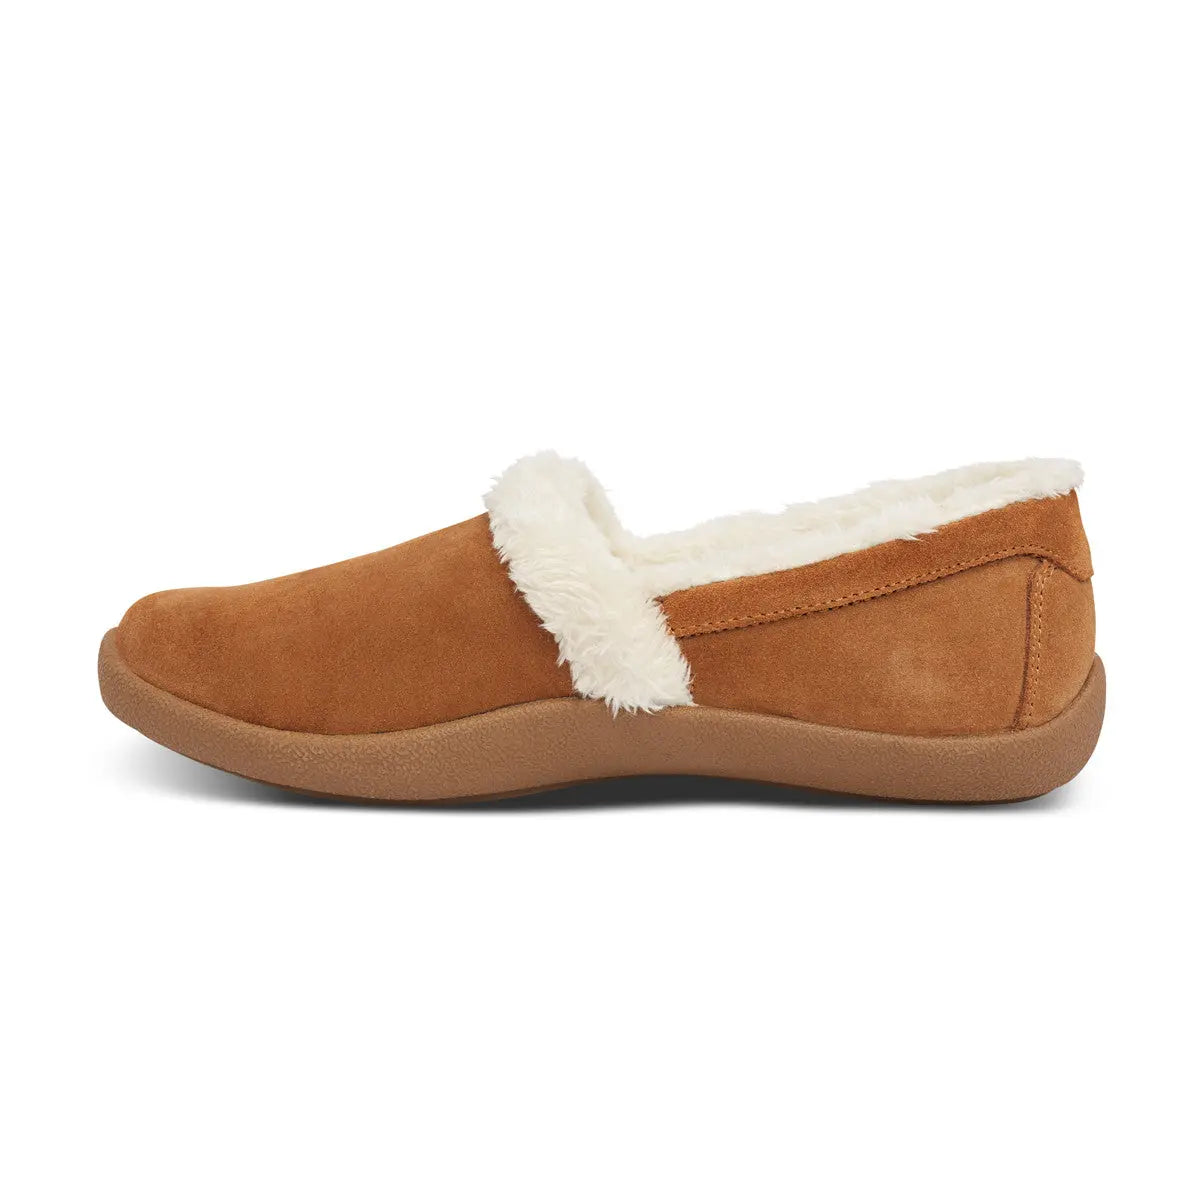 Anodyne Women's No.21 Smooth Toe, Camel - Left Side View